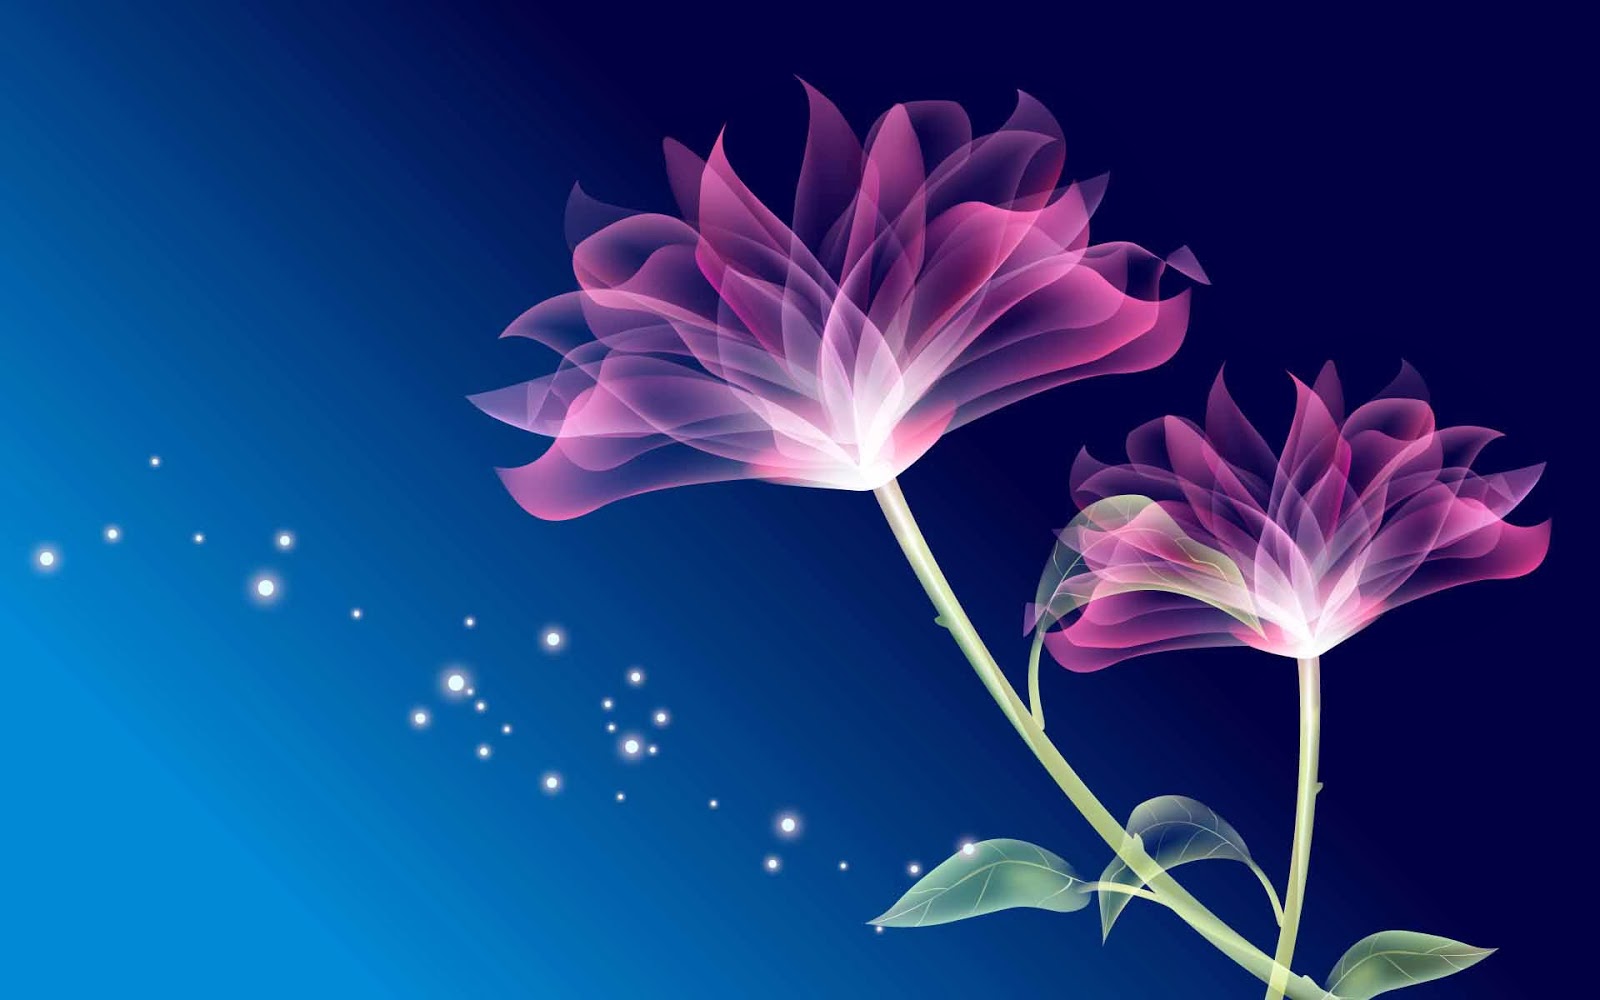 HQ Wallpapers: Fantasy Flower Wallpapers